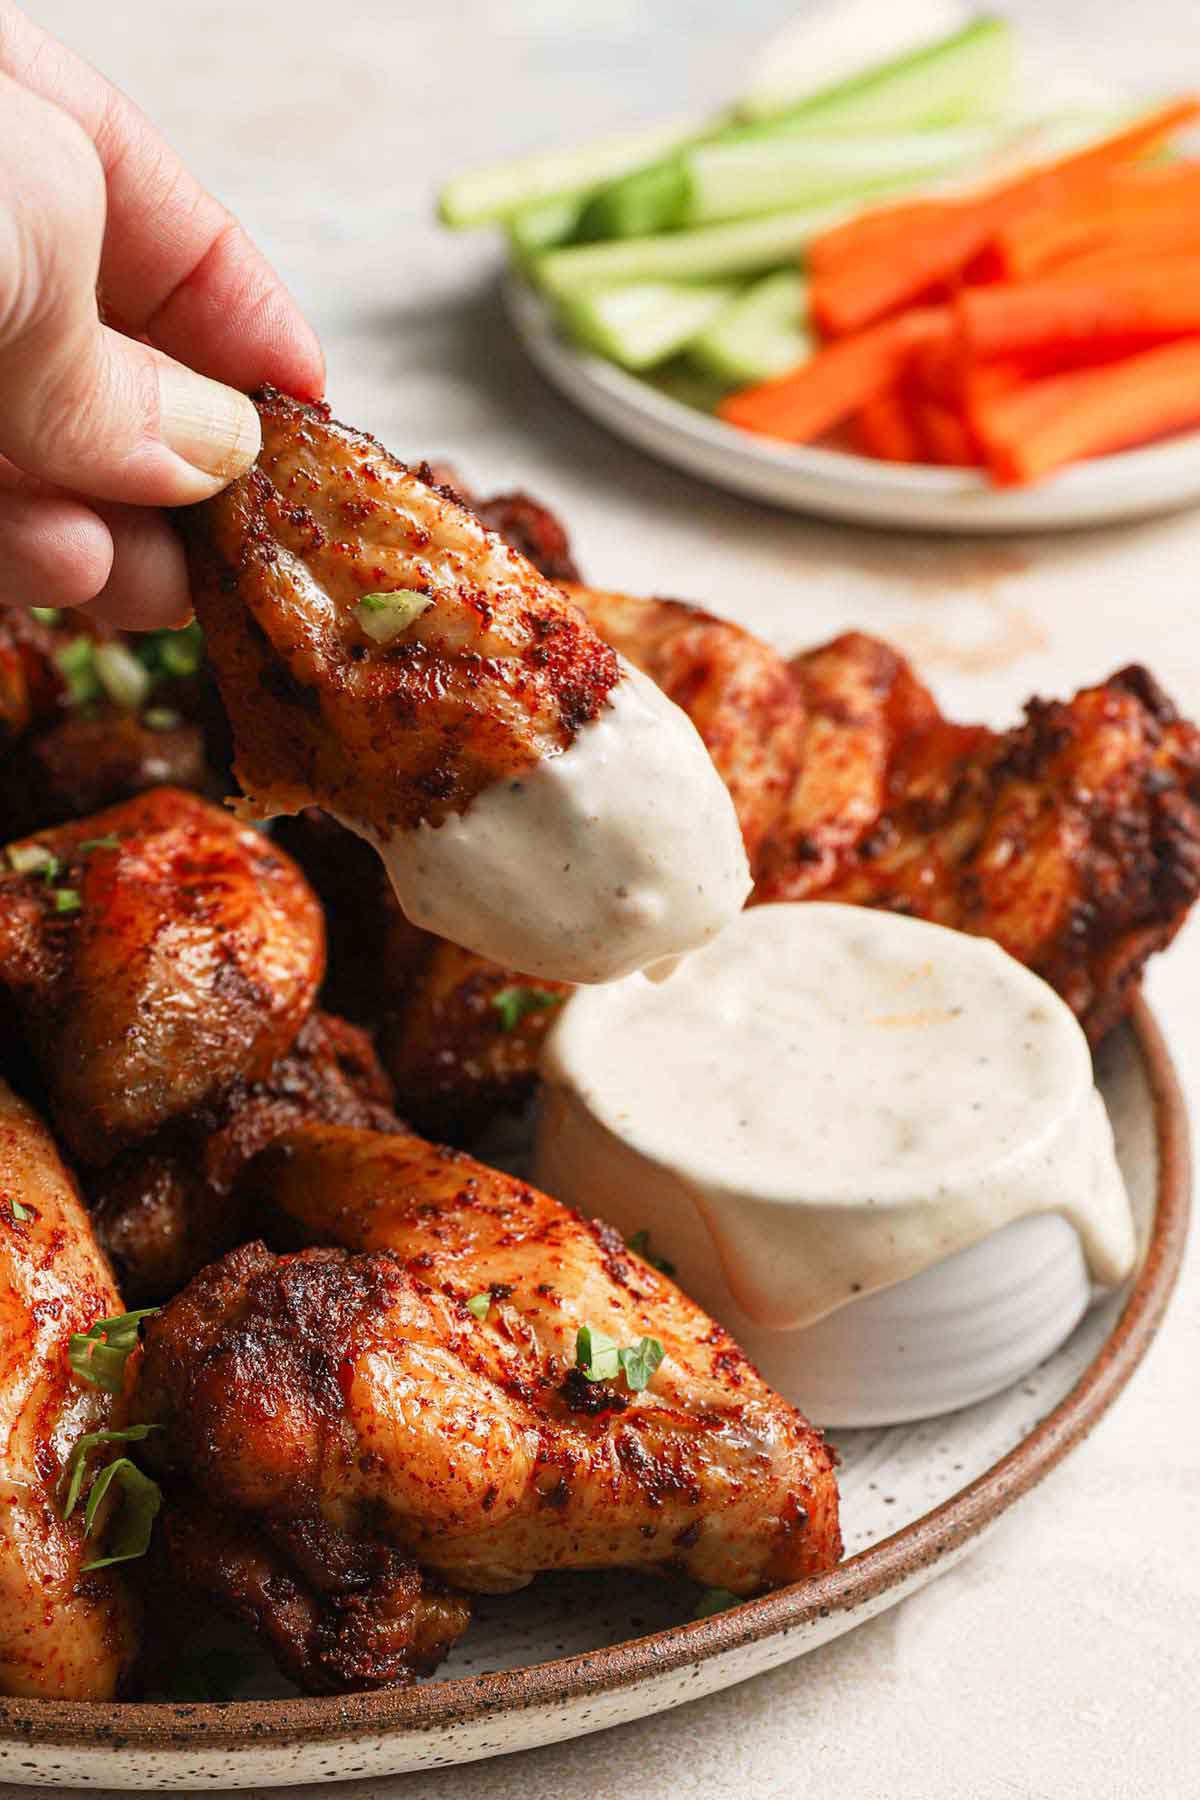 Platter of chicken wings with one being dipped into ranch dressing, and a plate of carrots and celery sticks in the background.